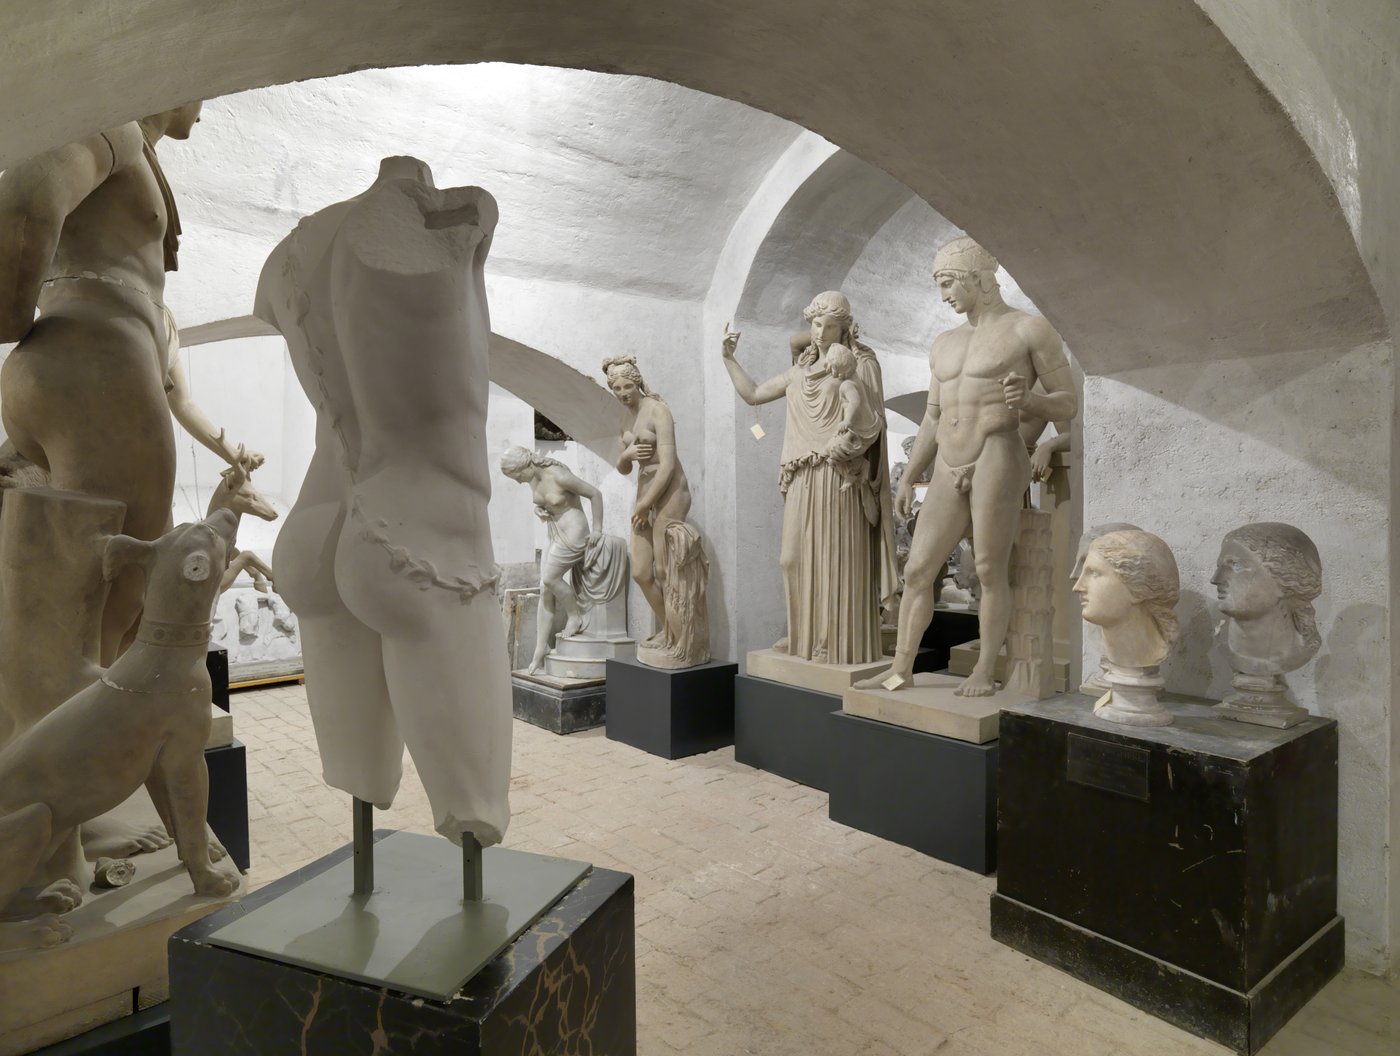 Photo of a room with vaults in which several Greek sculptures in different poses are standing close to each other